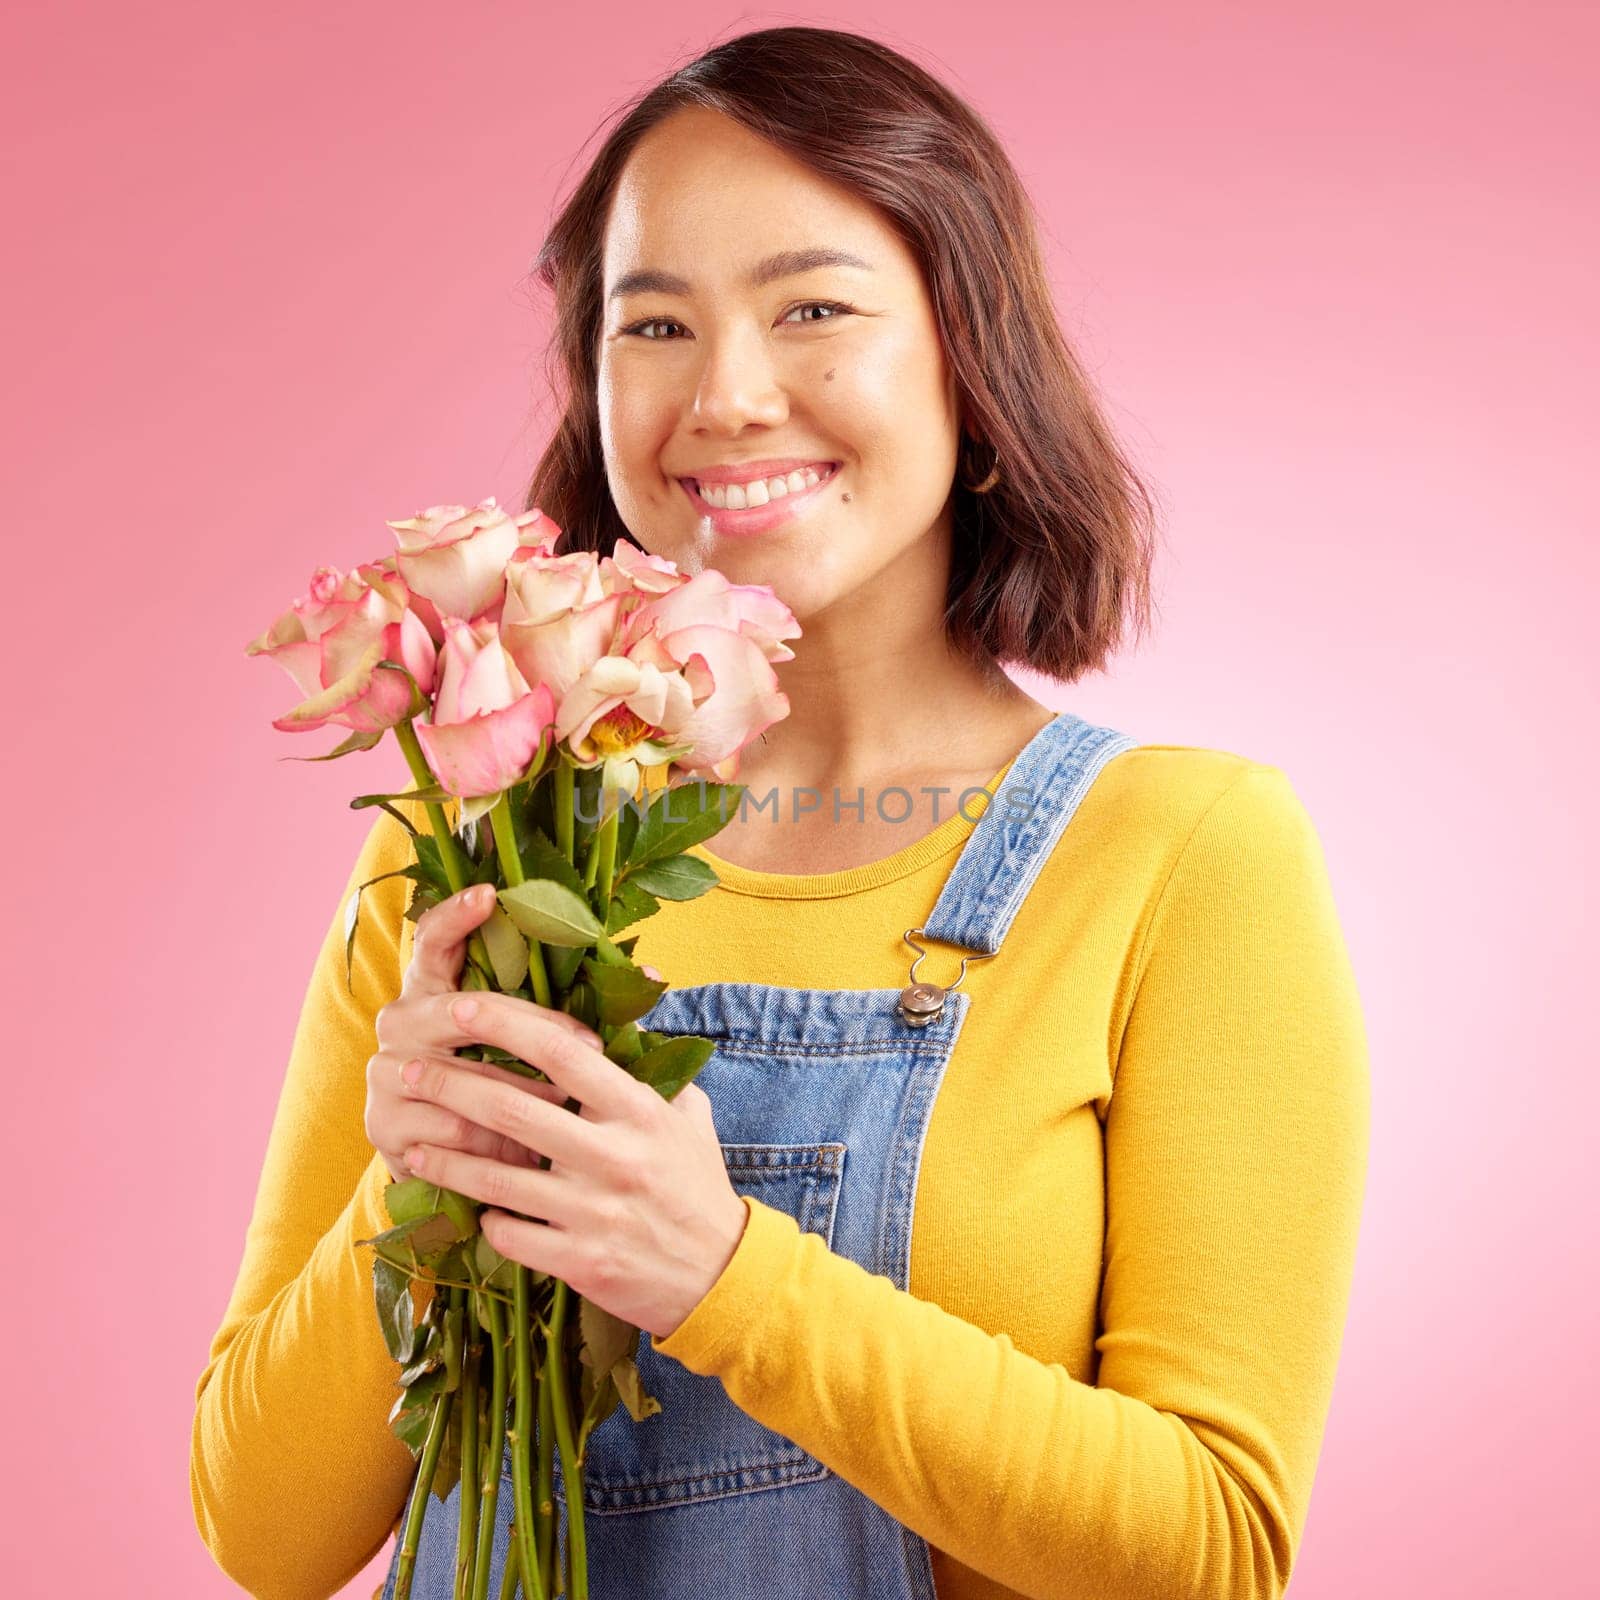 Woman, roses and gift with smile in studio portrait for celebration, birthday or party by pink background. Japanese student girl, gen z fashion and bouquet of flowers for present, reward or romance by YuriArcurs